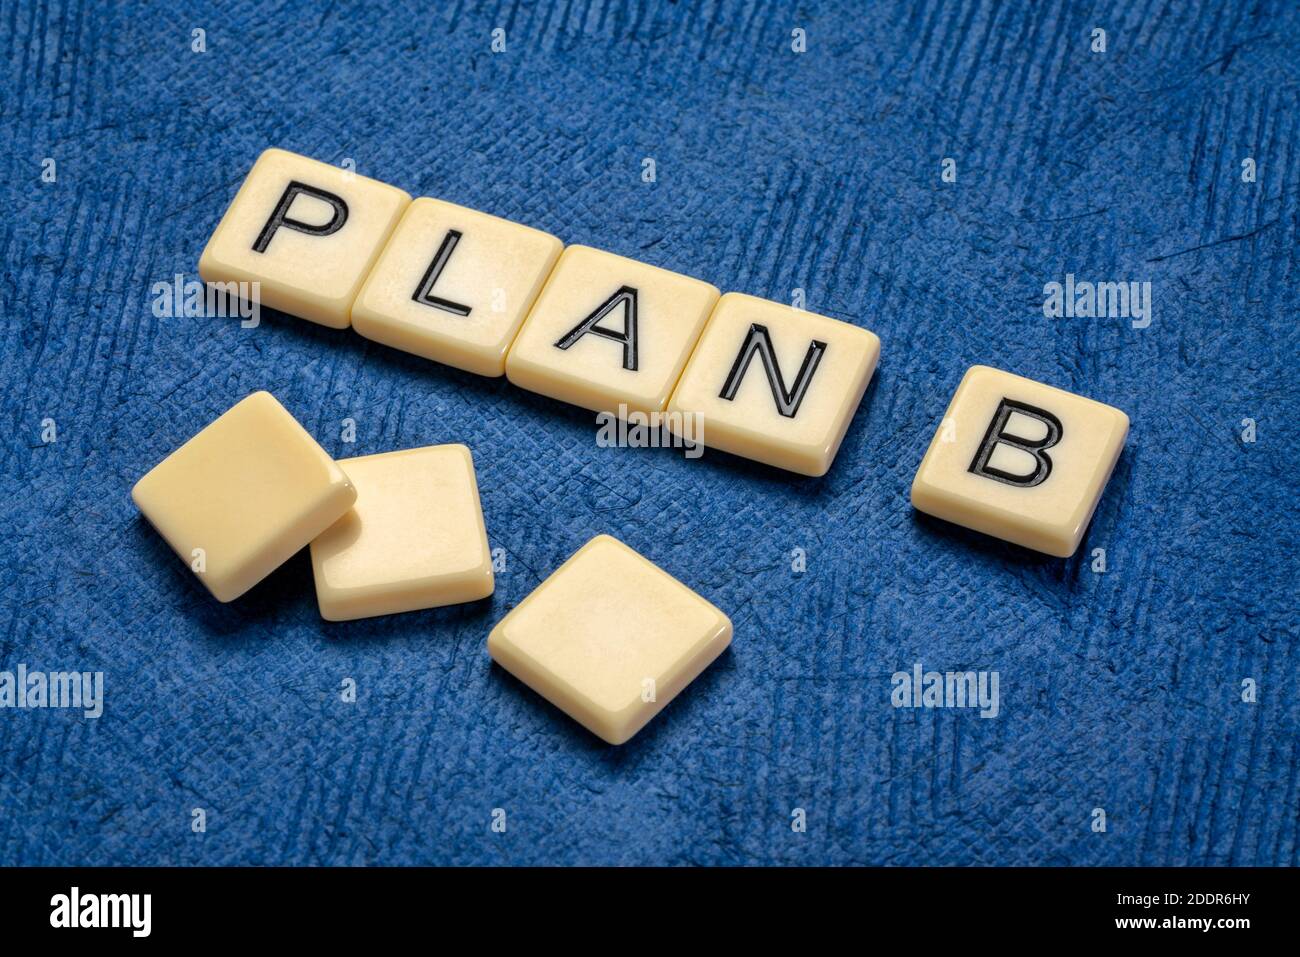 plan B text in ivory letter tiles against textured handmade paper, revision and changing business or personal plans and goals concept Stock Photo